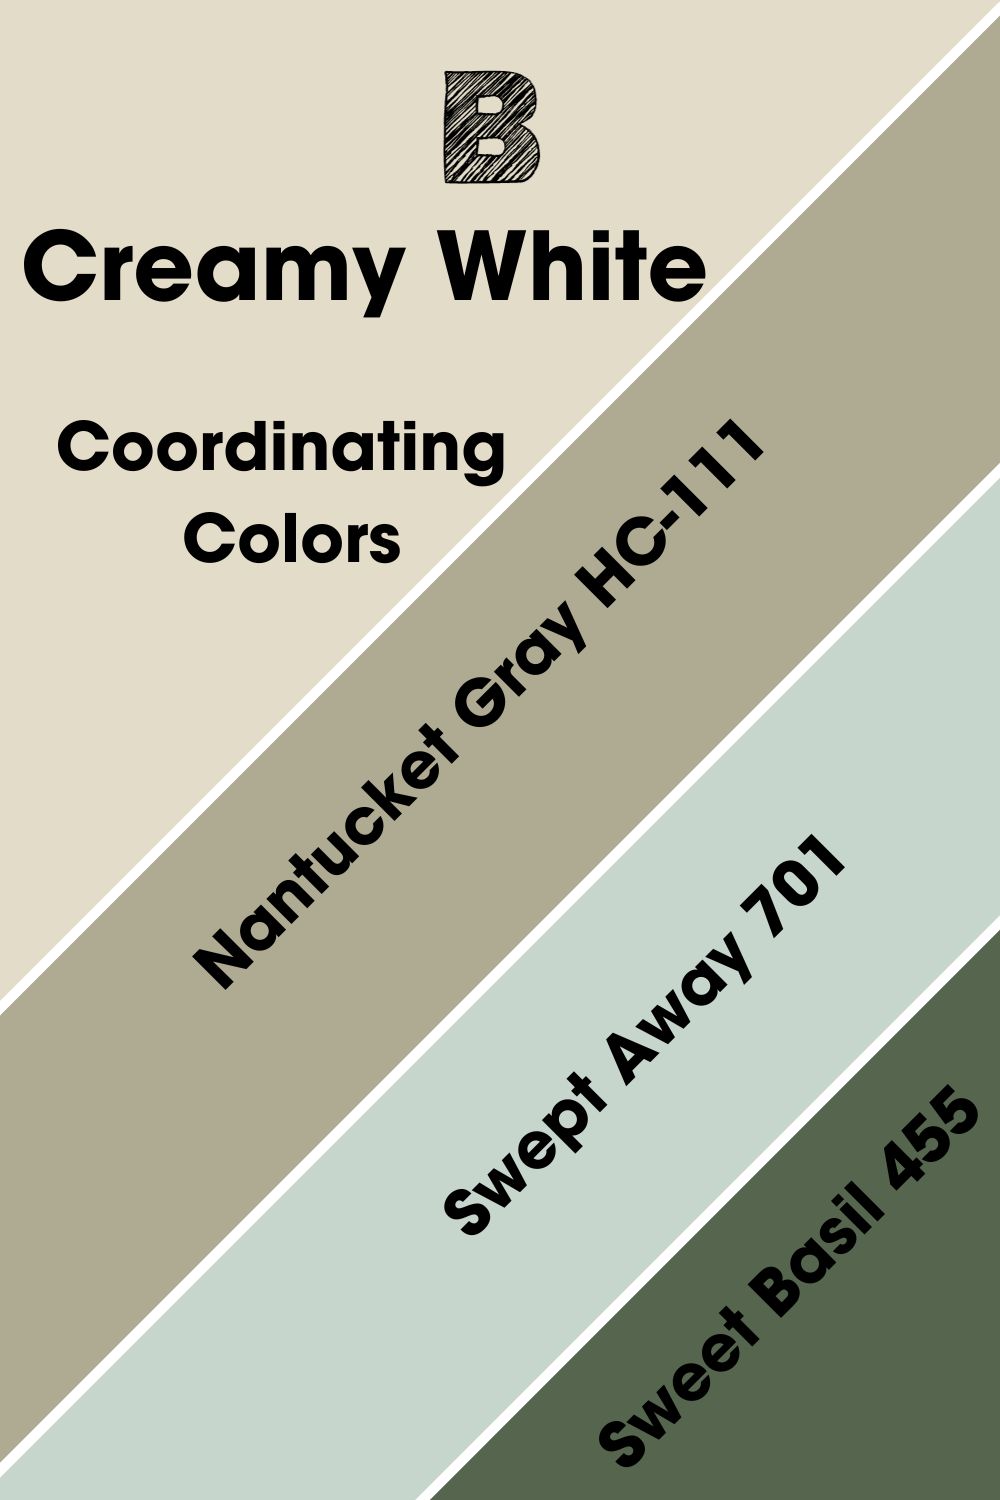  Coordinating Colors forCreamy White